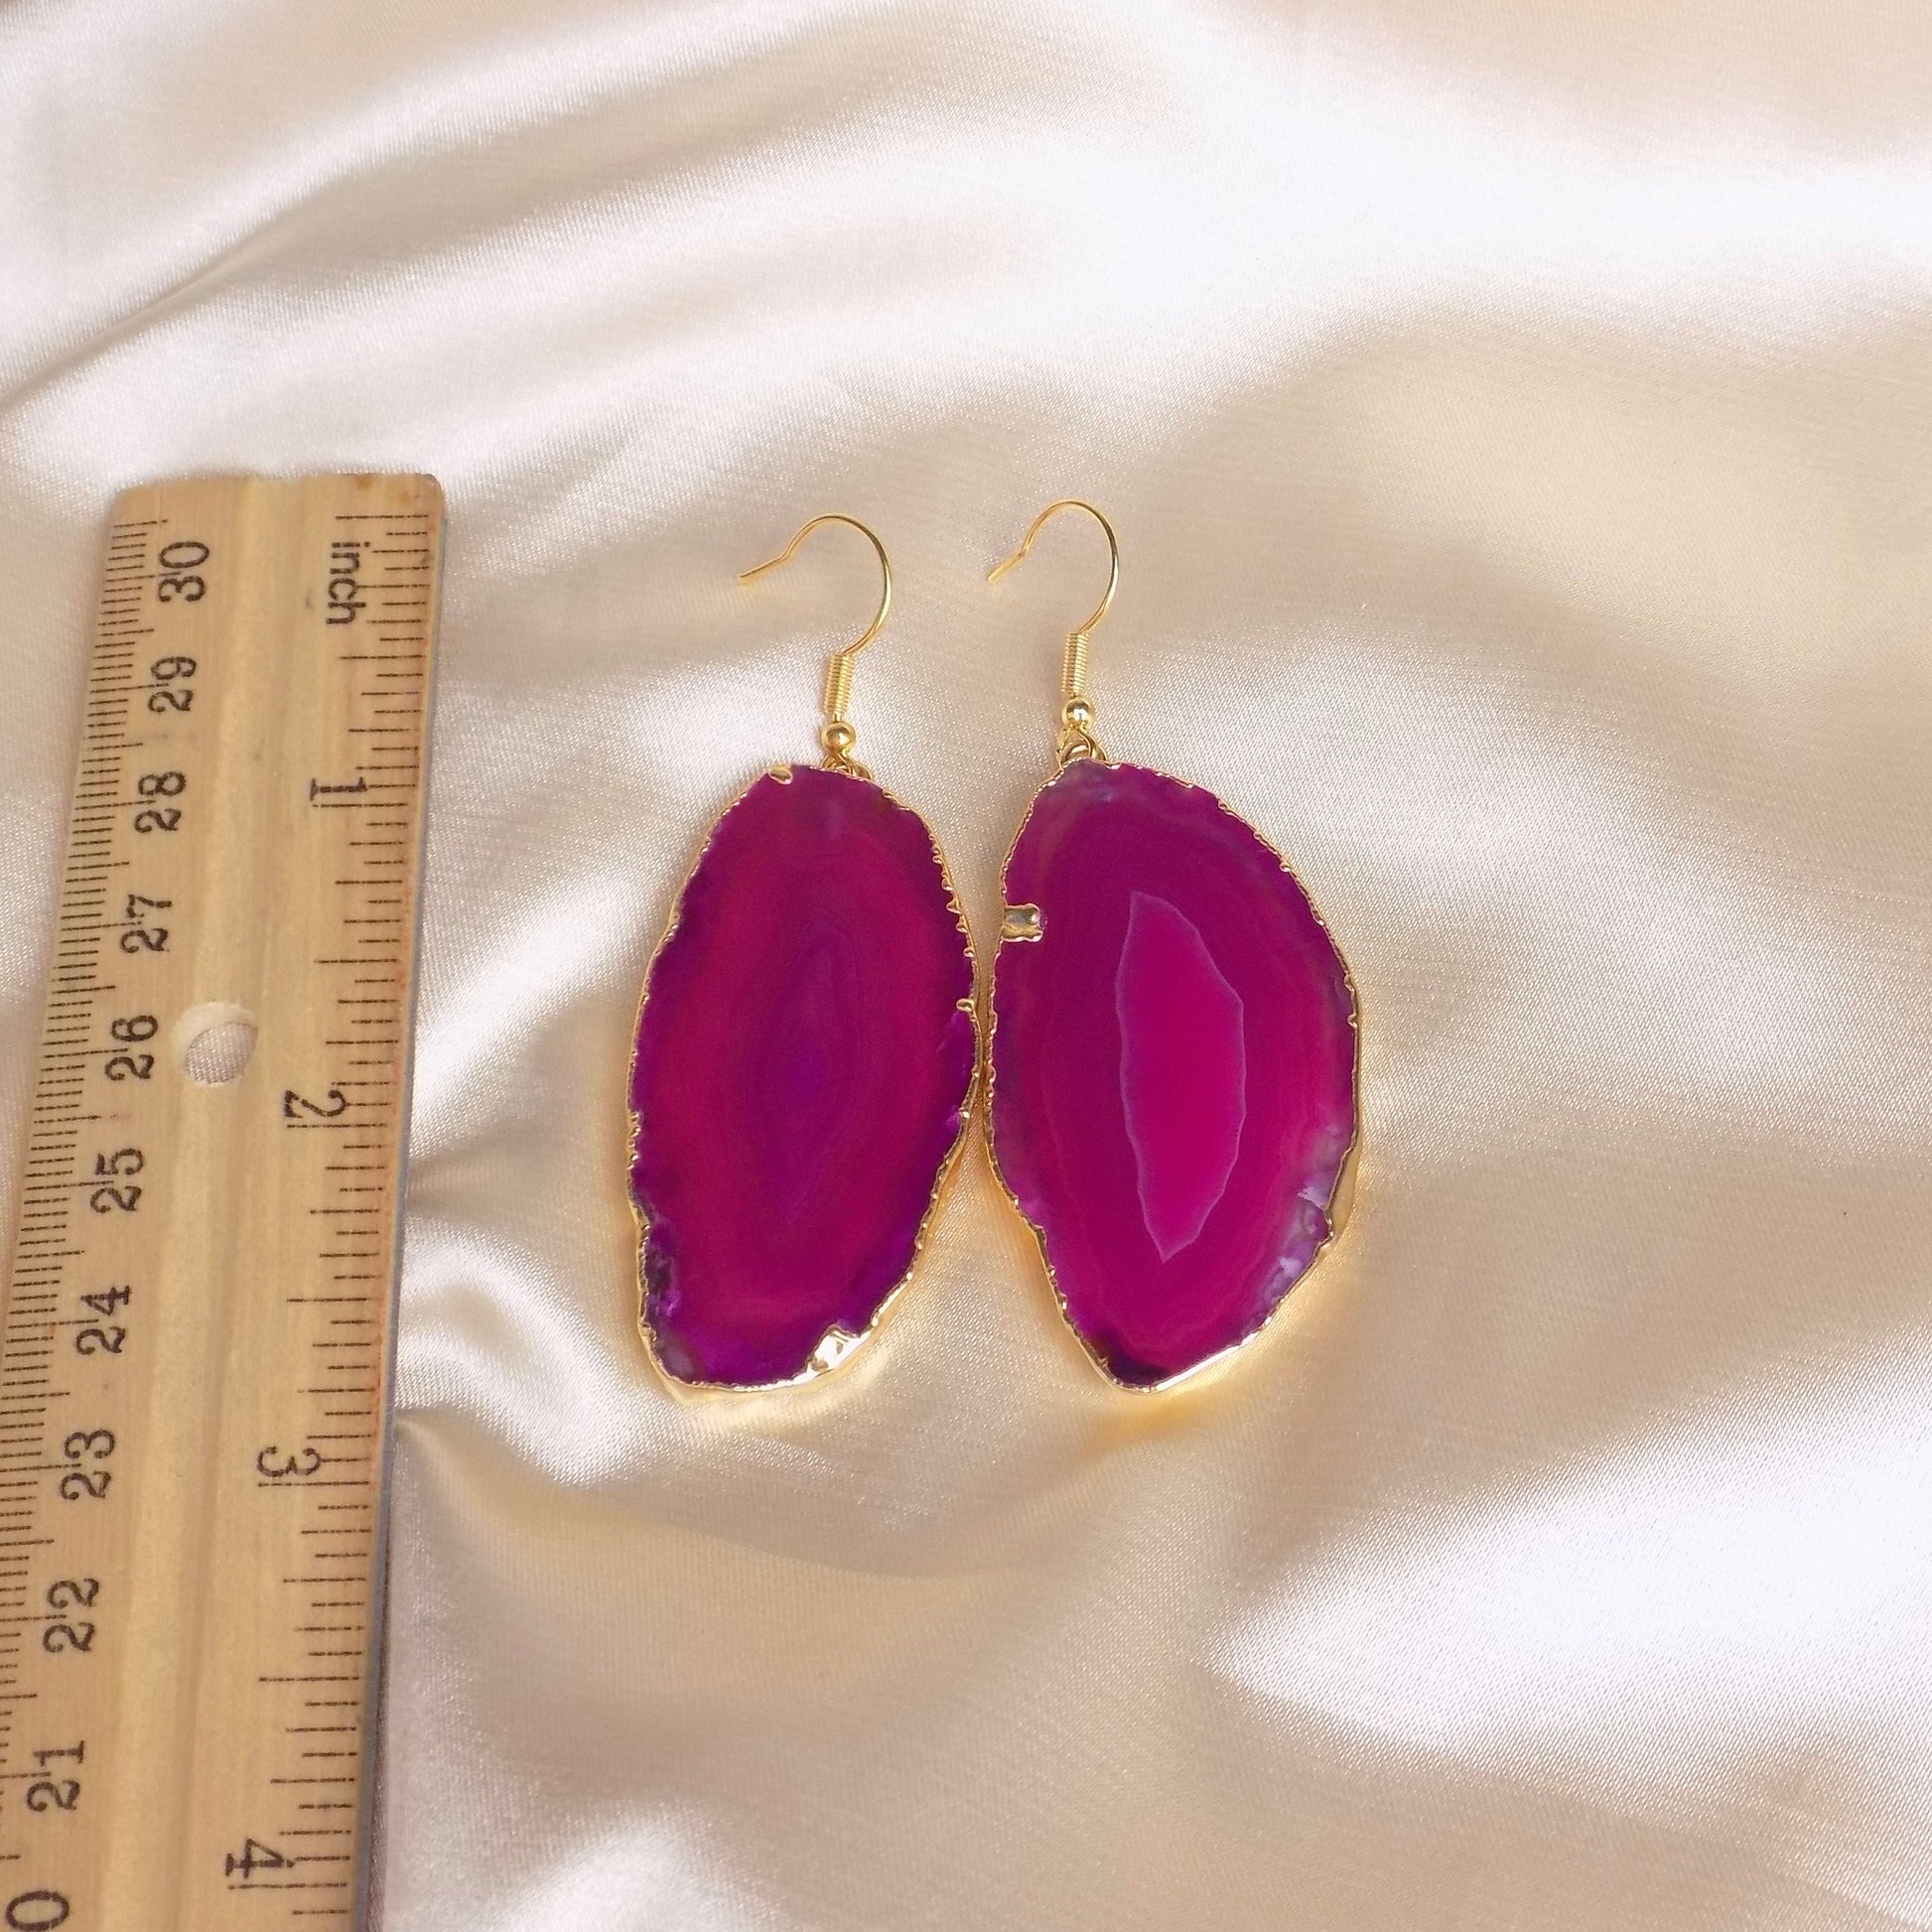 Pink Agate Statement Earrings Gold, Sliced Geode Earrings, Unique Boho Crystal Gifts Women, G15-85